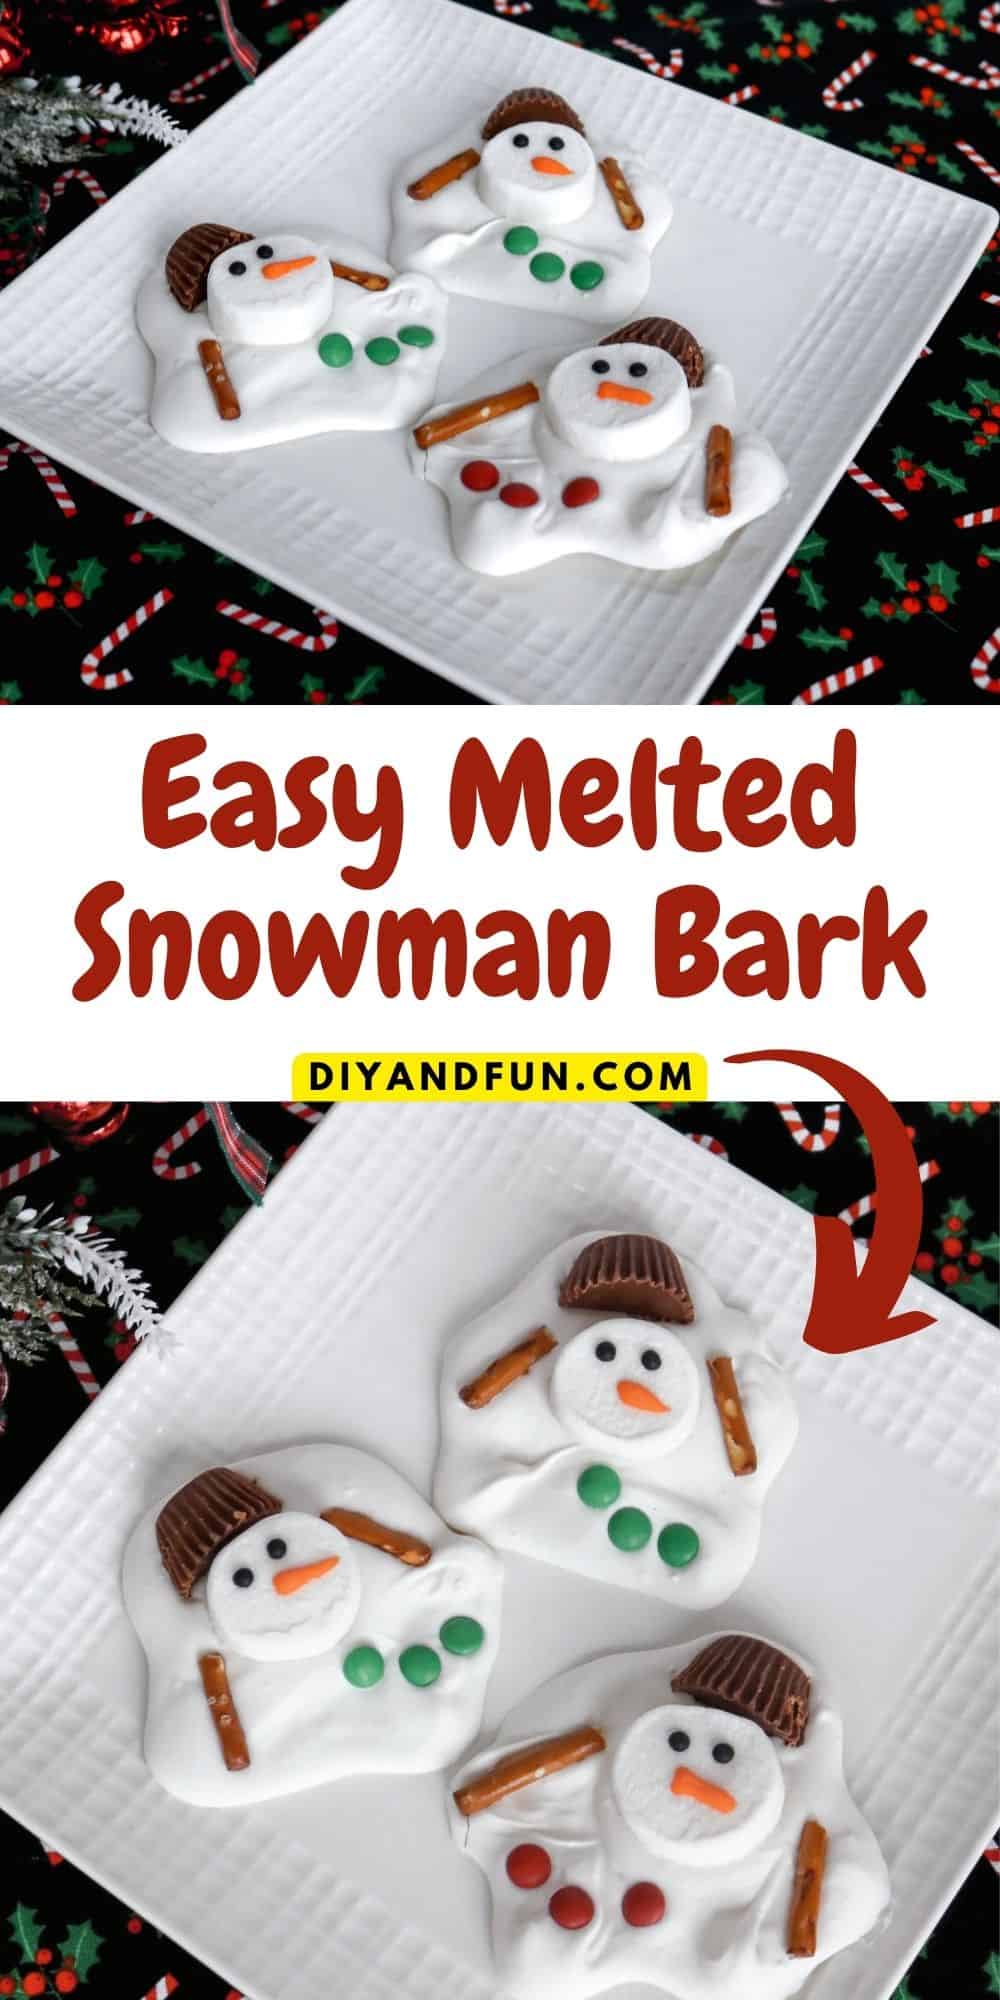 Easy Melted Snowman Bark, a simple Christmas holiday dessert or snack recipe for making chocolate bark that looks like a snowman.